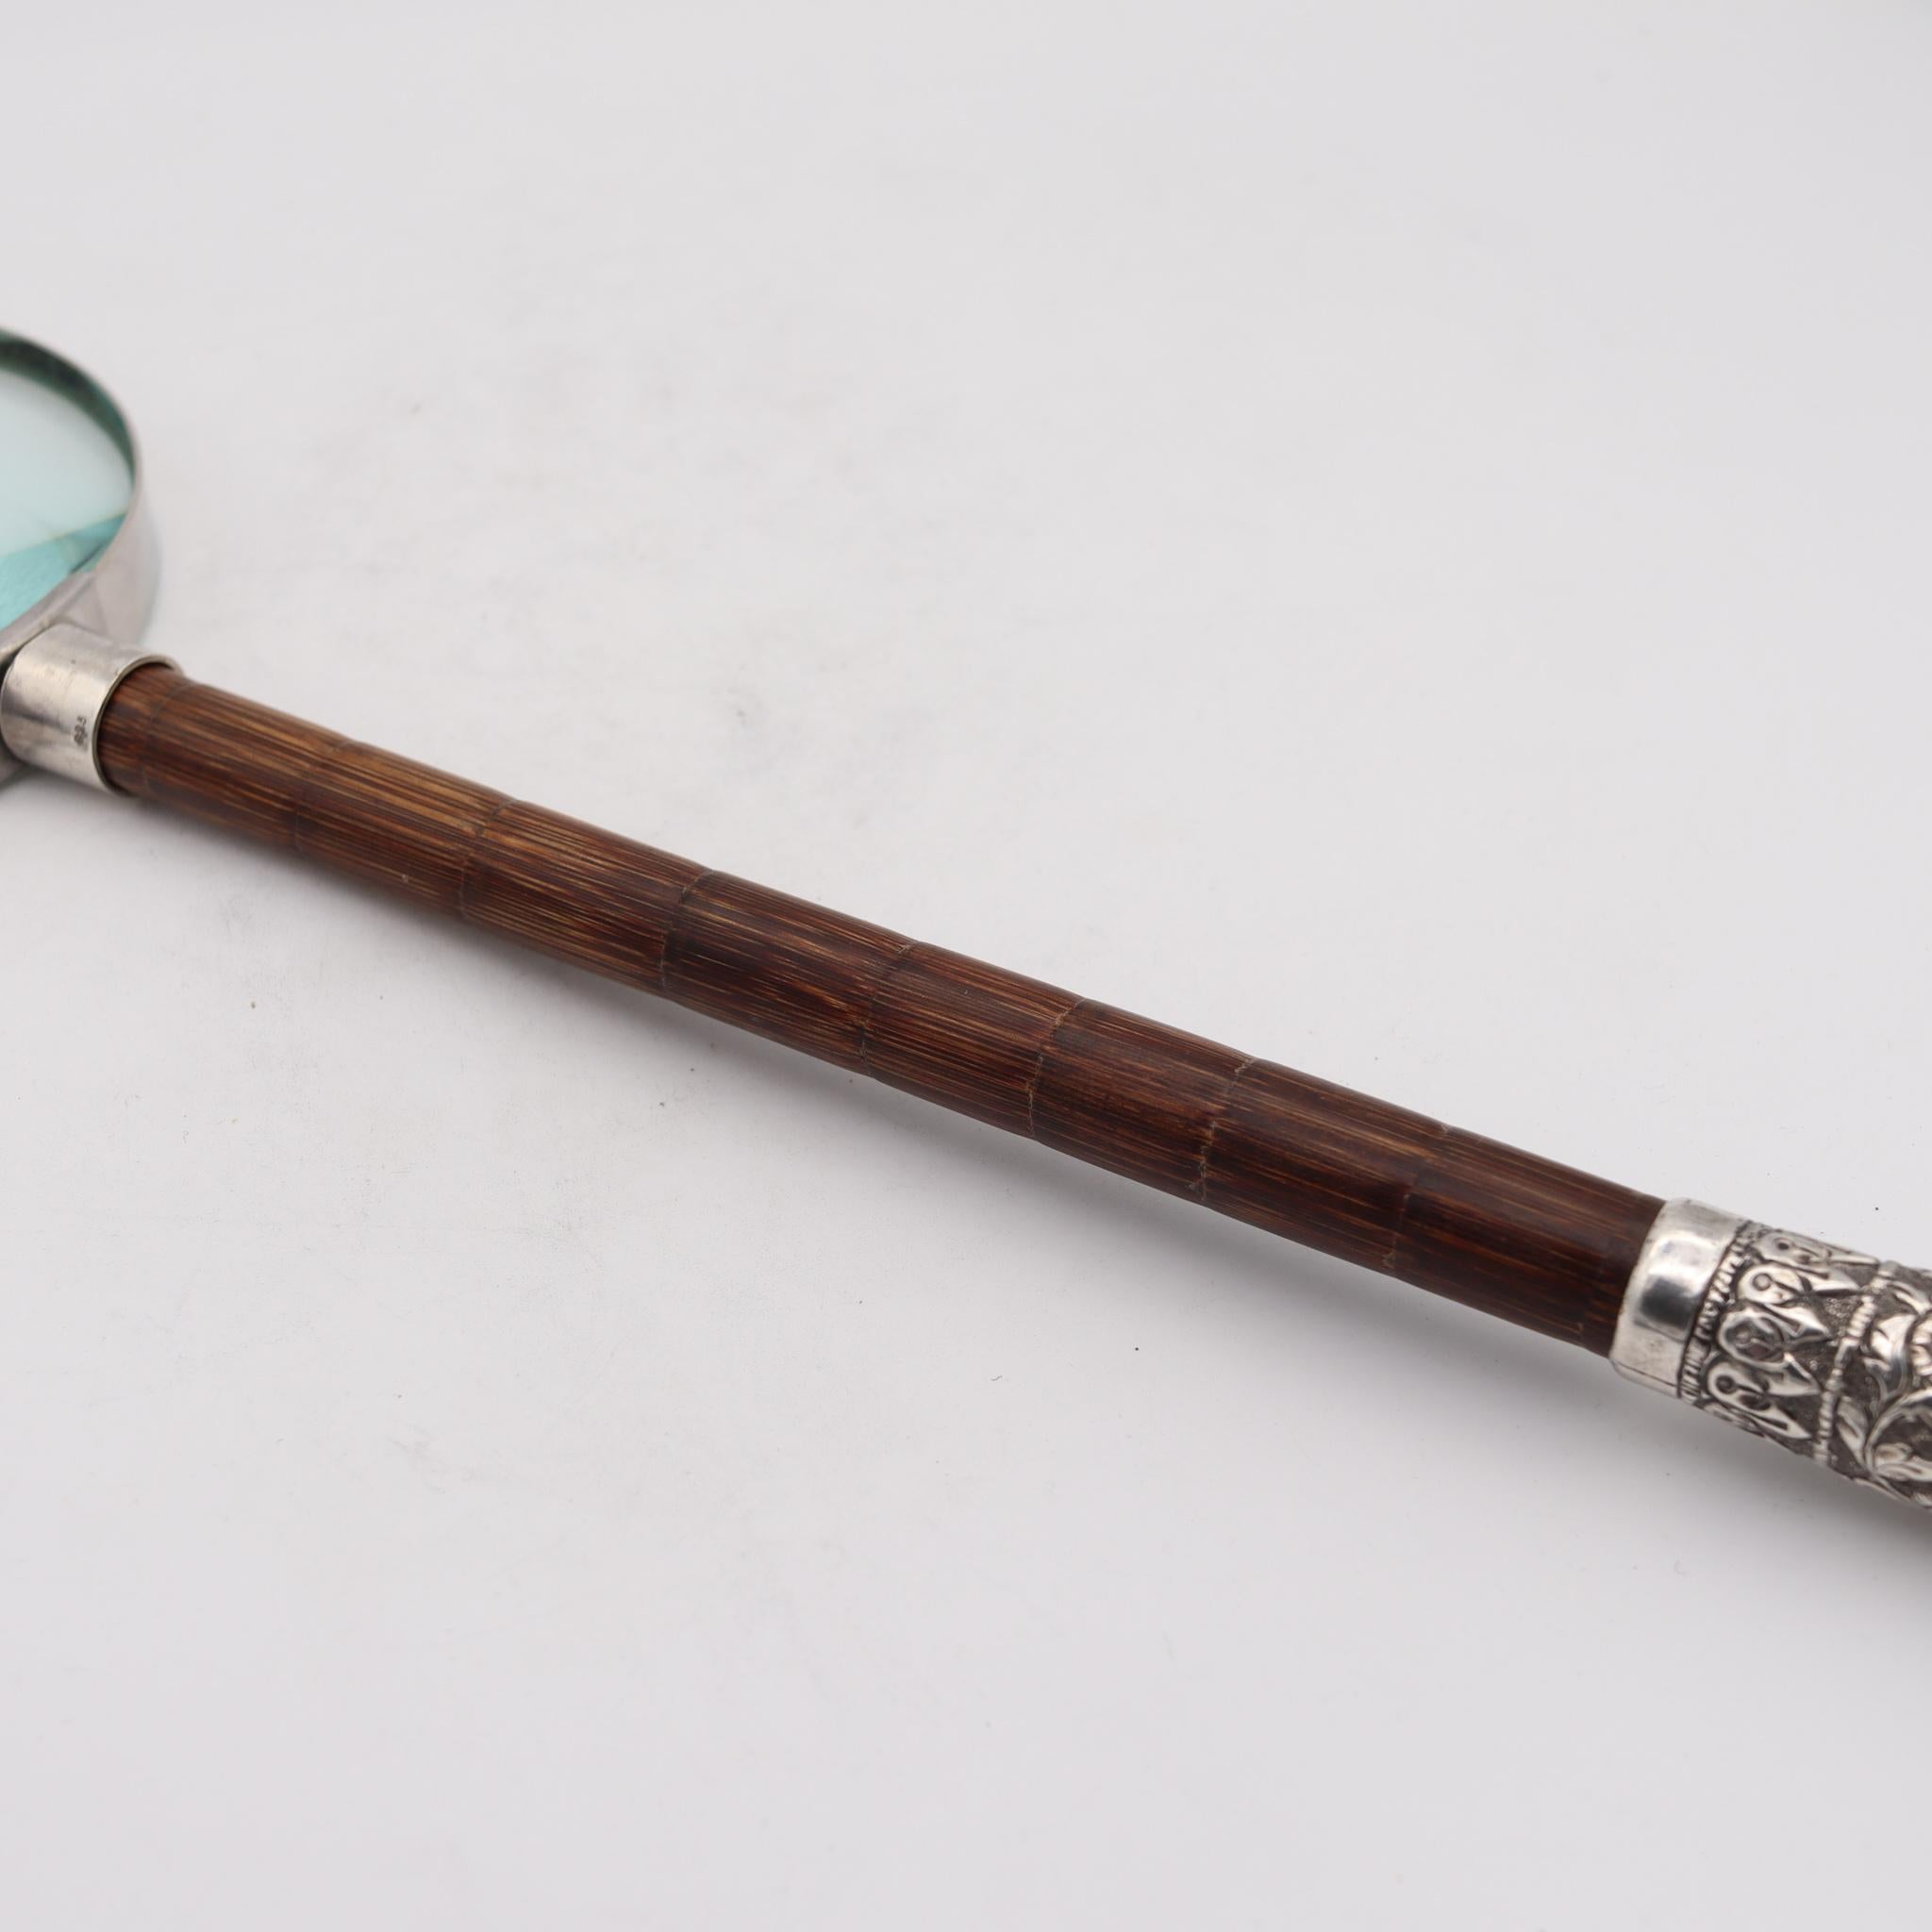 Edwardian 1905 Handle Desk Magnifier Glass in Sterling Silver and Bamboo Wood In Excellent Condition For Sale In Miami, FL